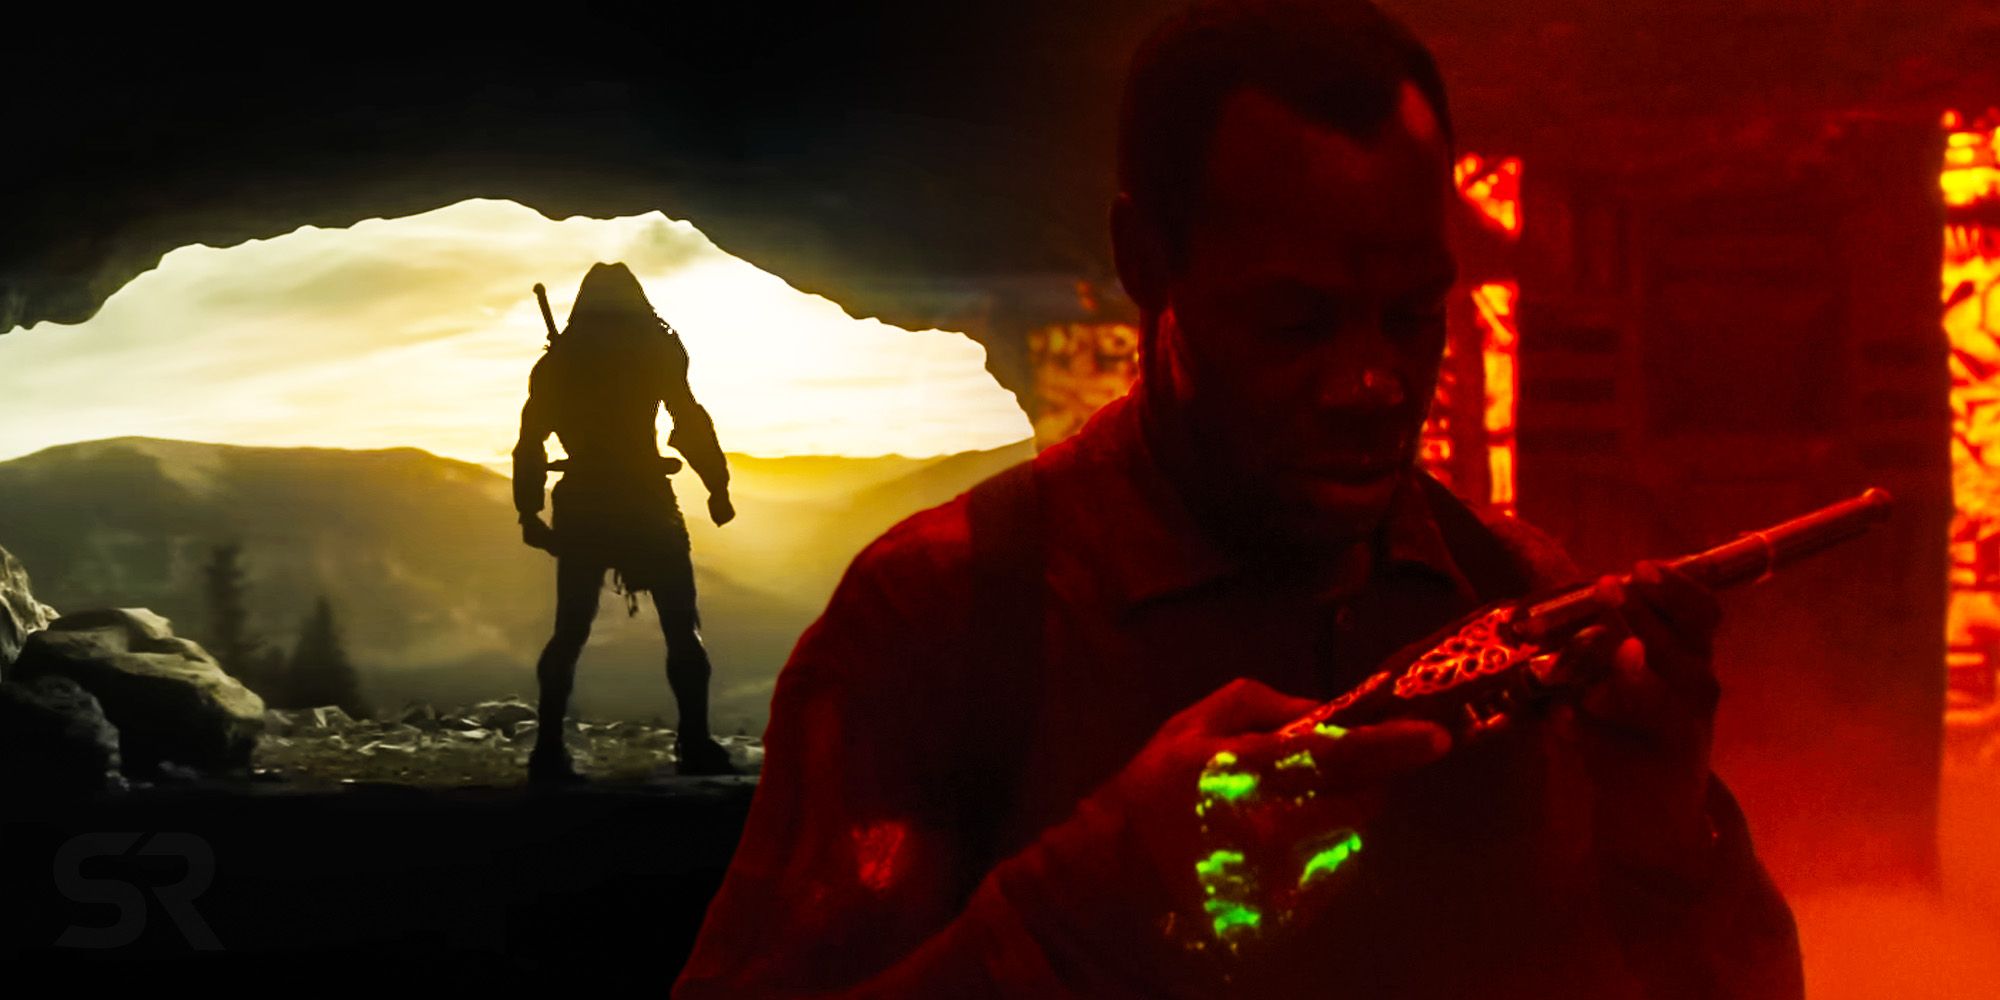 Prey collage with pistol from Predator 2 connection